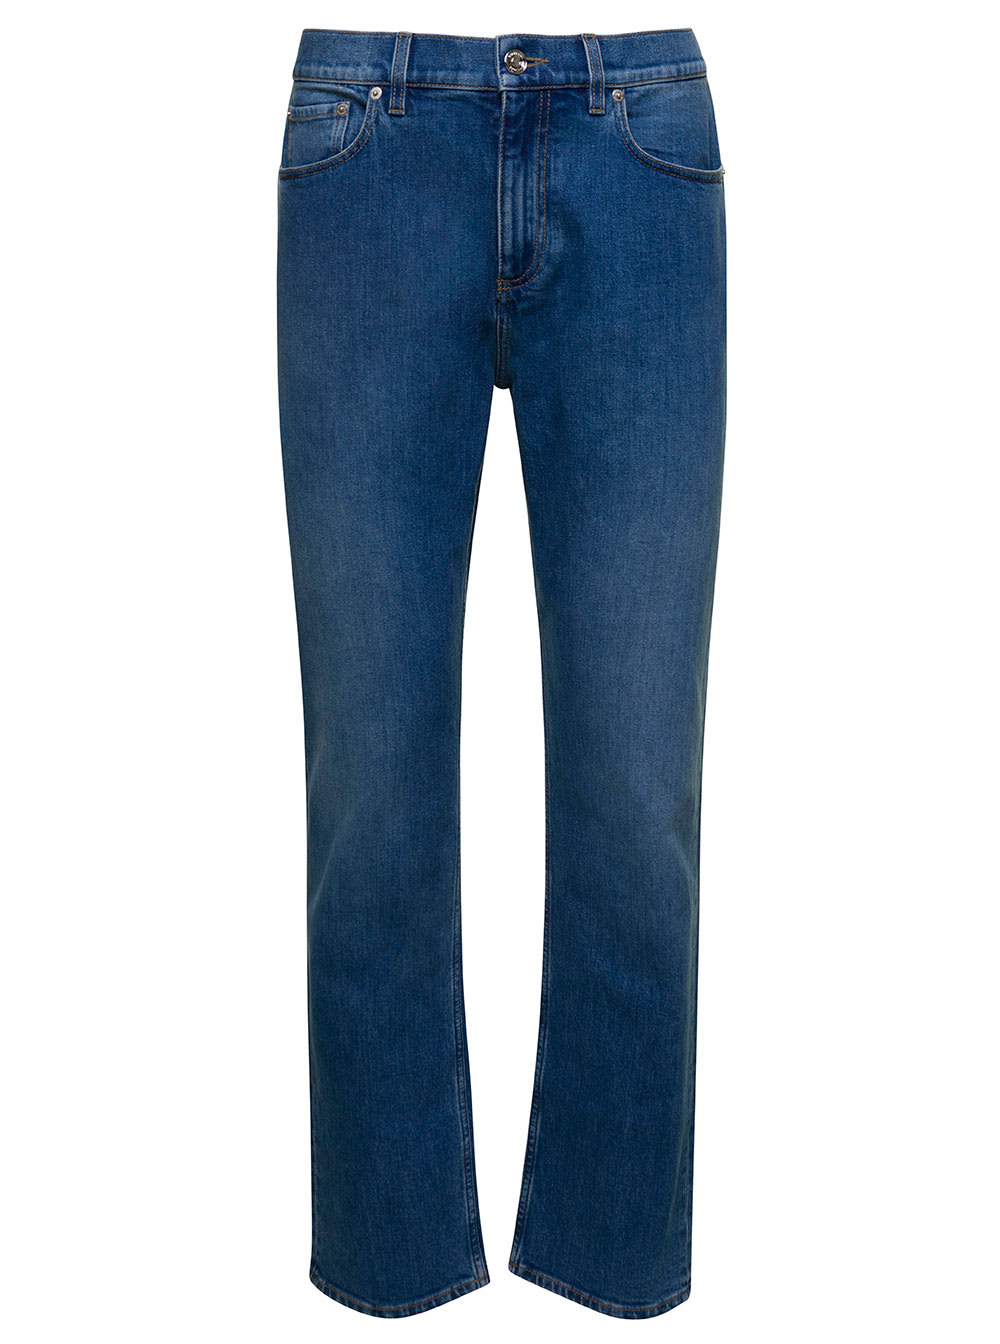 Blue Jeans With Tb Patch At The Back In Stretch Cotton Denim Man